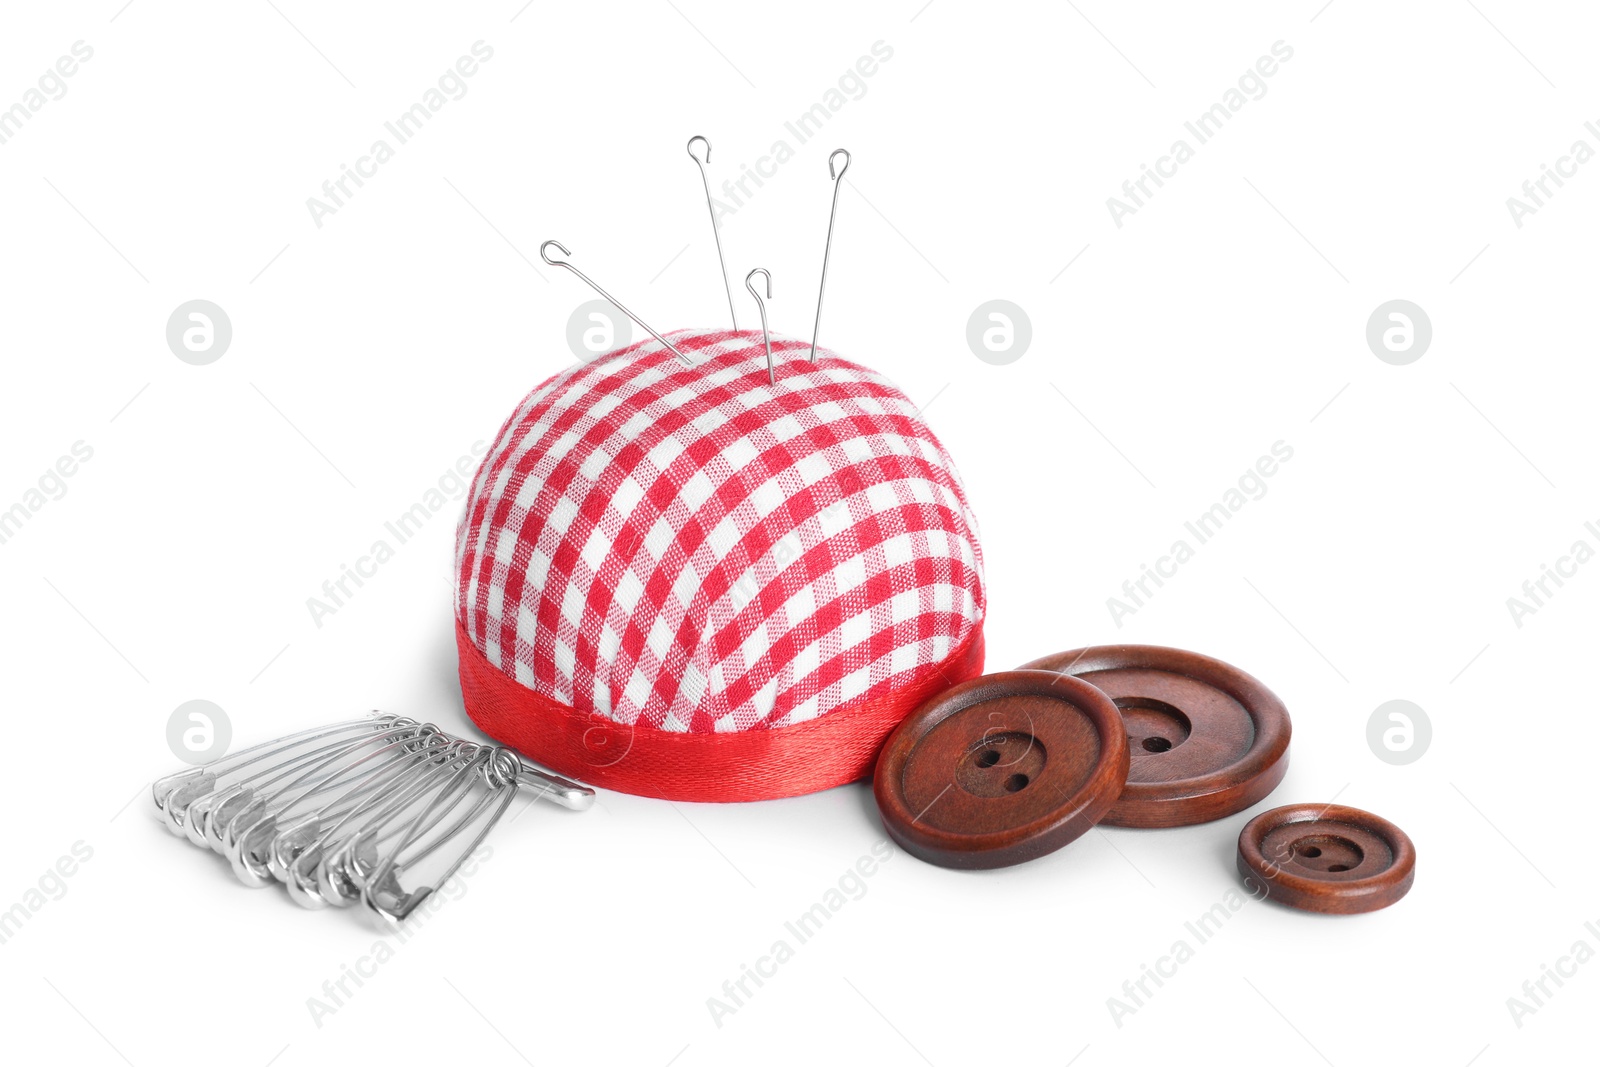 Photo of Pincushion, sewing needles, safety pins and buttons isolated on white